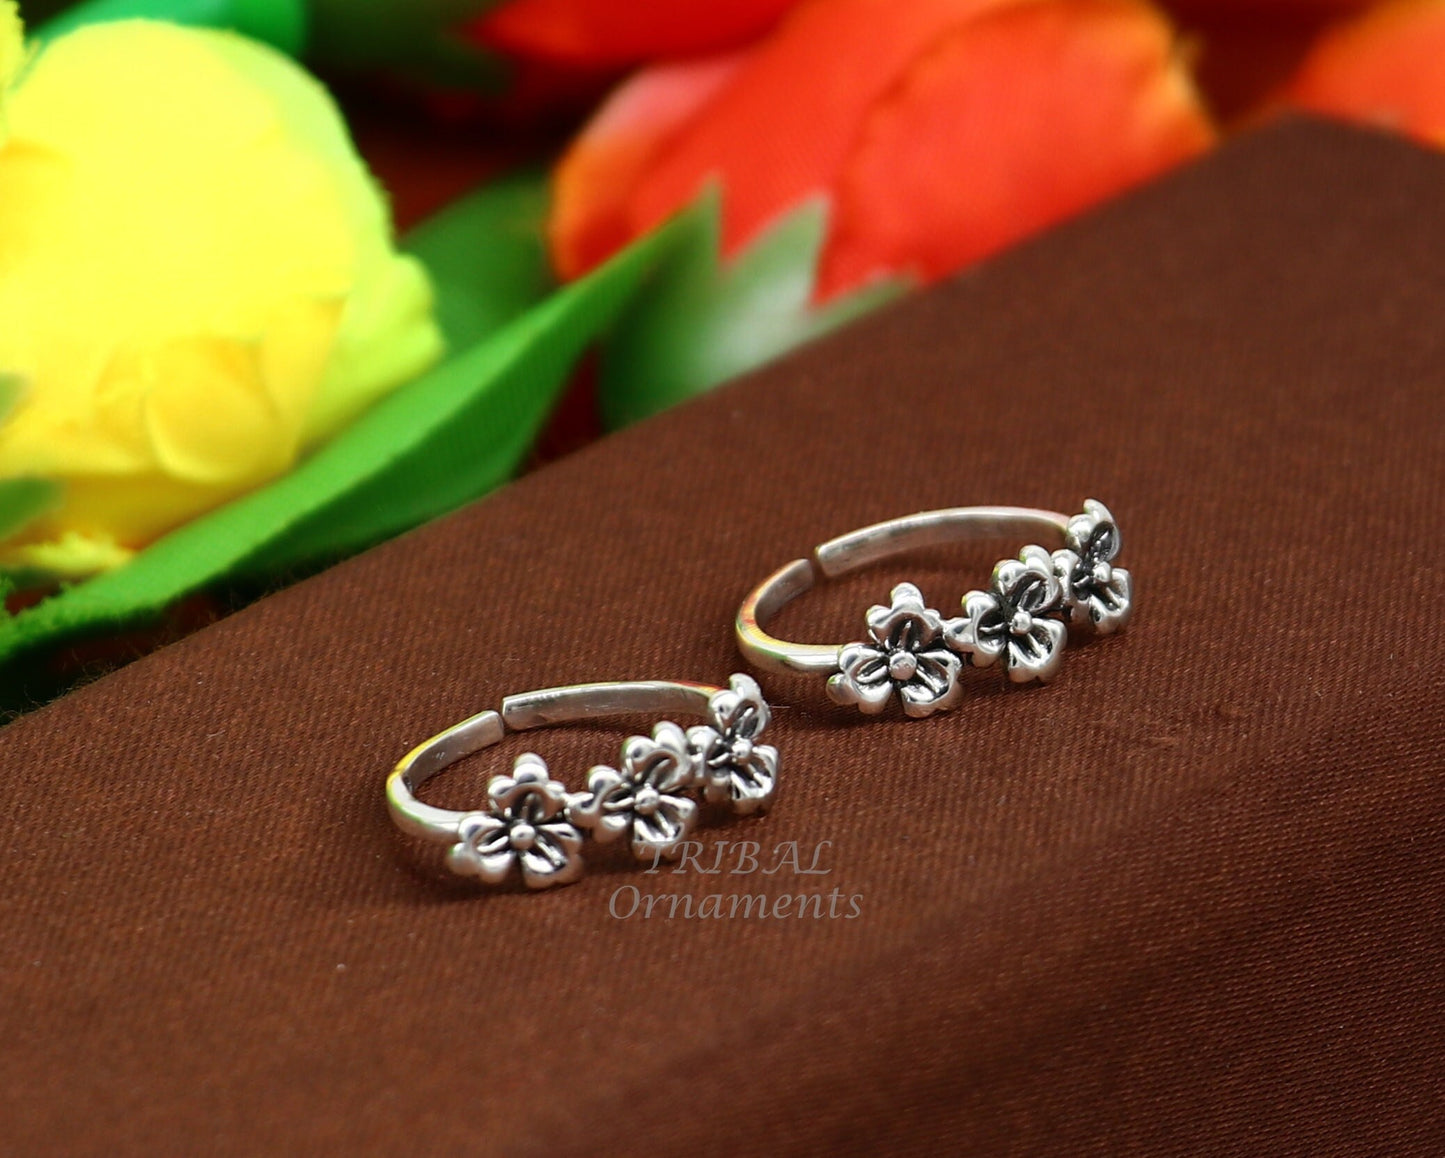 925 sterling silver uniquely handcrafted flower style oxidized toe rings. best brides wedding jewelry tribal jewelry ytr16 - TRIBAL ORNAMENTS